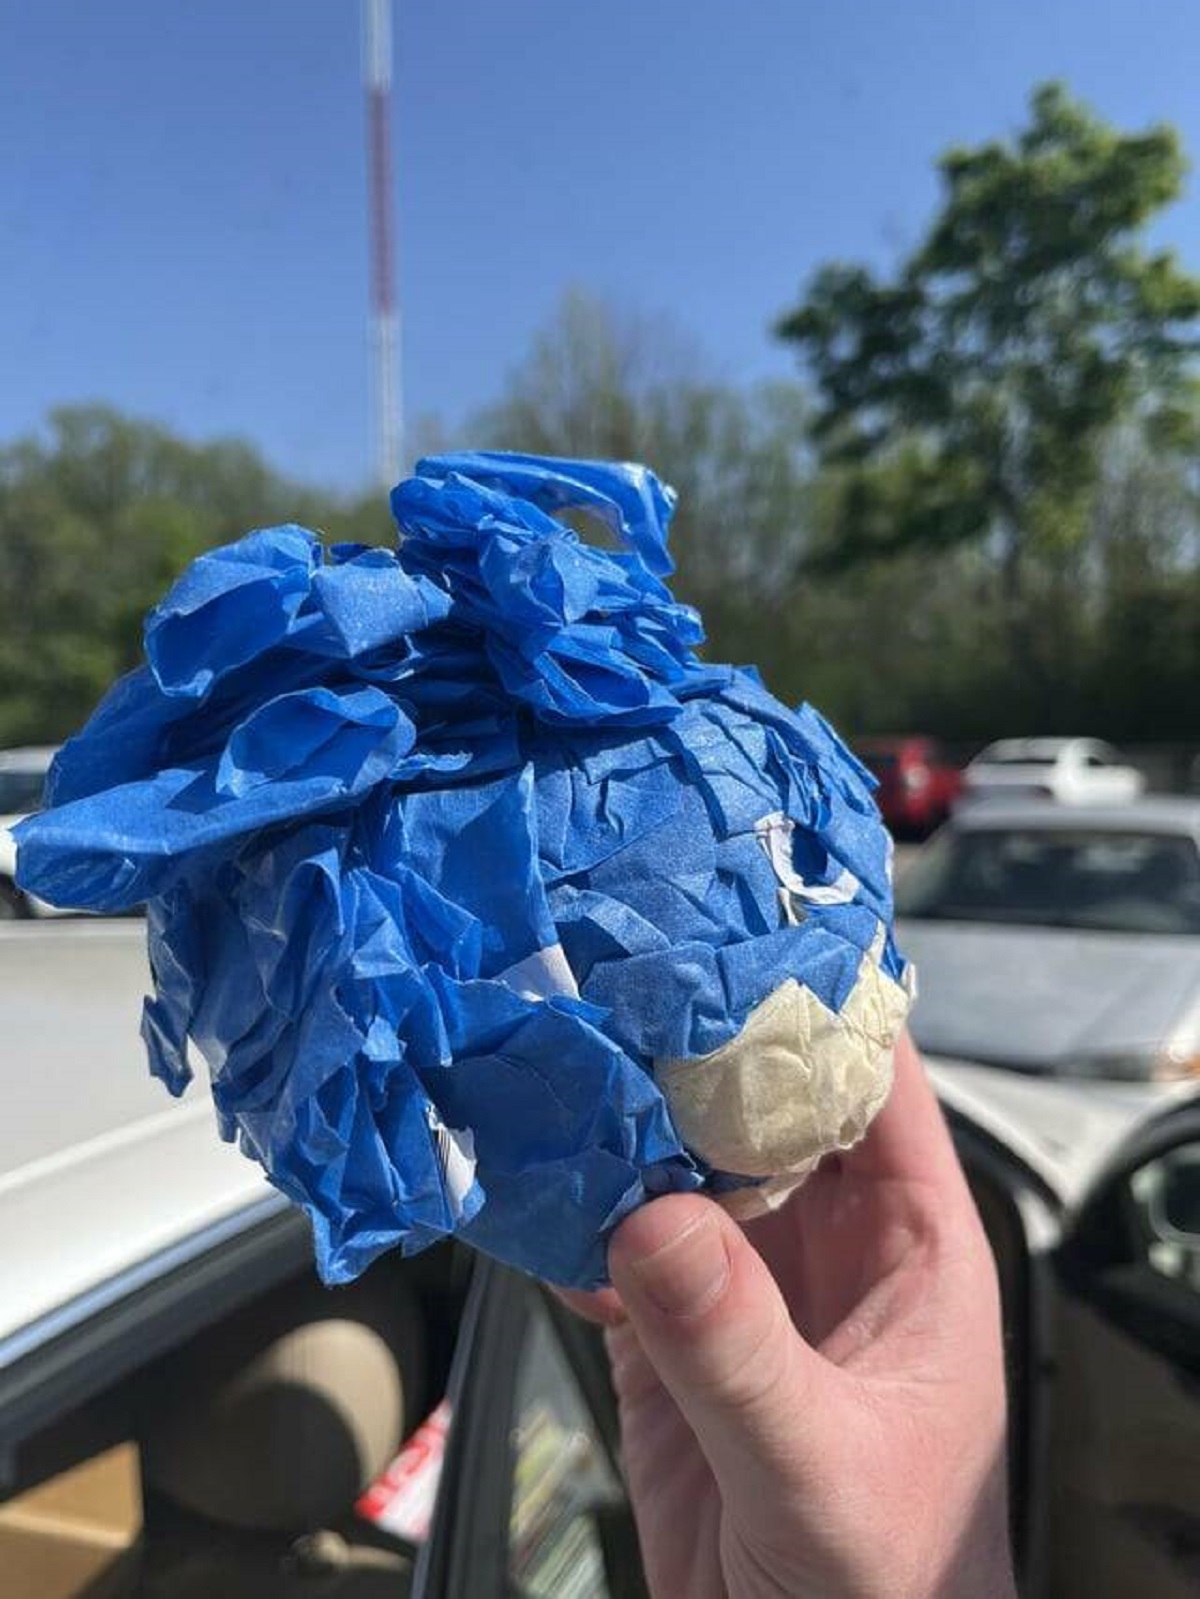 "This ball of tape my roommates made unintentionally looks like Sonic"